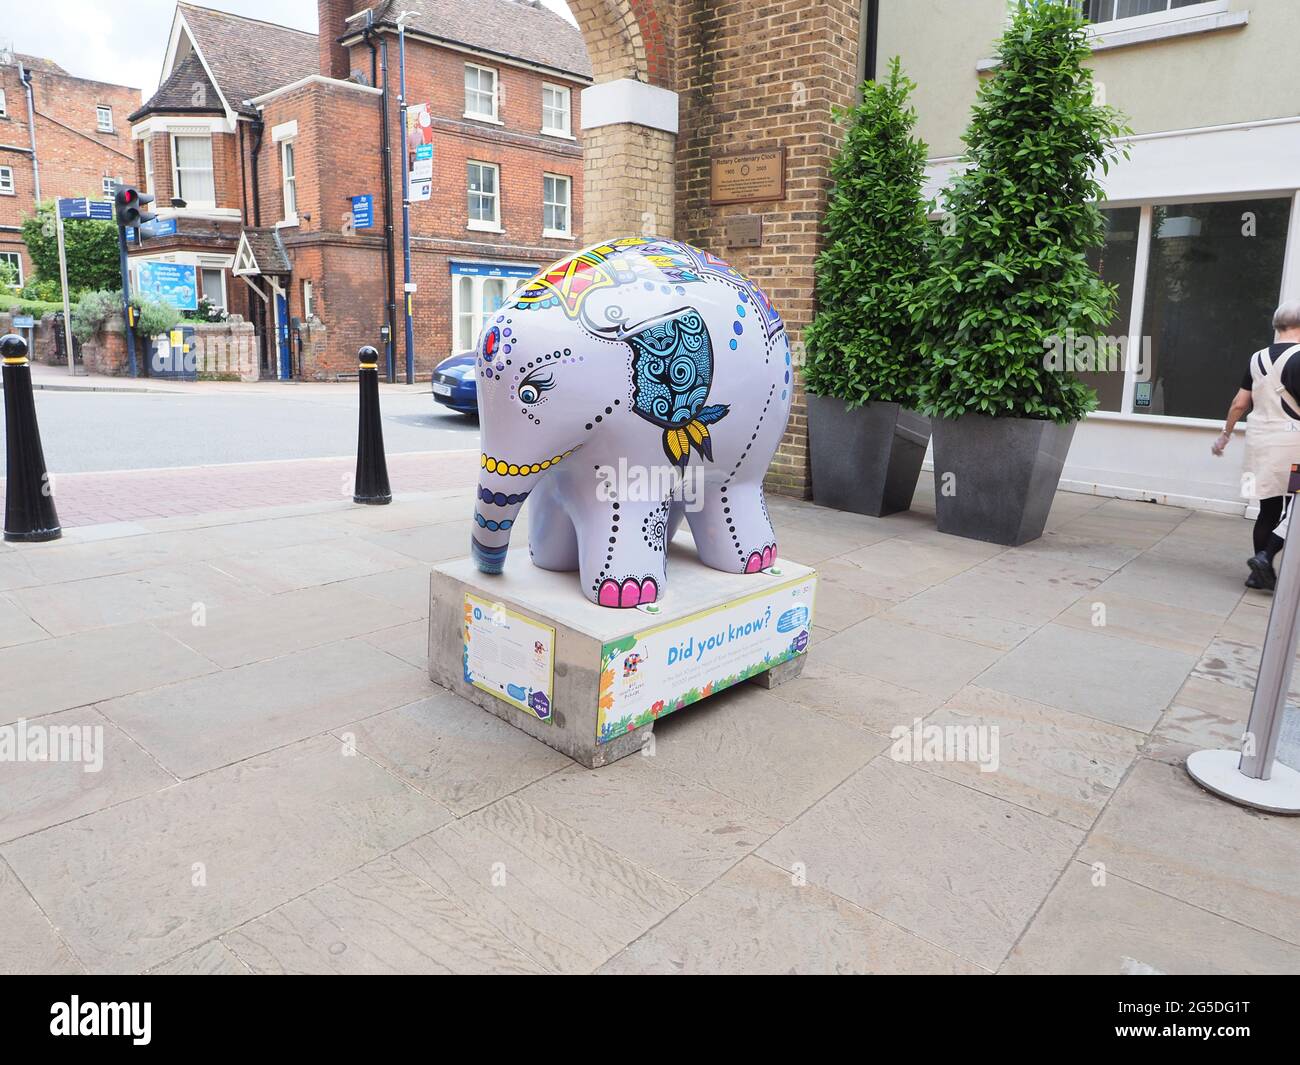 Maidstone, Kent, UK. 26th June, 2021. Elmer's Big Heart of Kent Parade aims to raise awareness of Heart of Kent Hospice through an innovative and Maidstone's first ever sculpture trail featuring 51 artistically decorated Elmer elephants dotted around the town. Pictured: an Elmer at the entrance to Fremlin Walk. Credit: James Bell/Alamy Live News Stock Photo